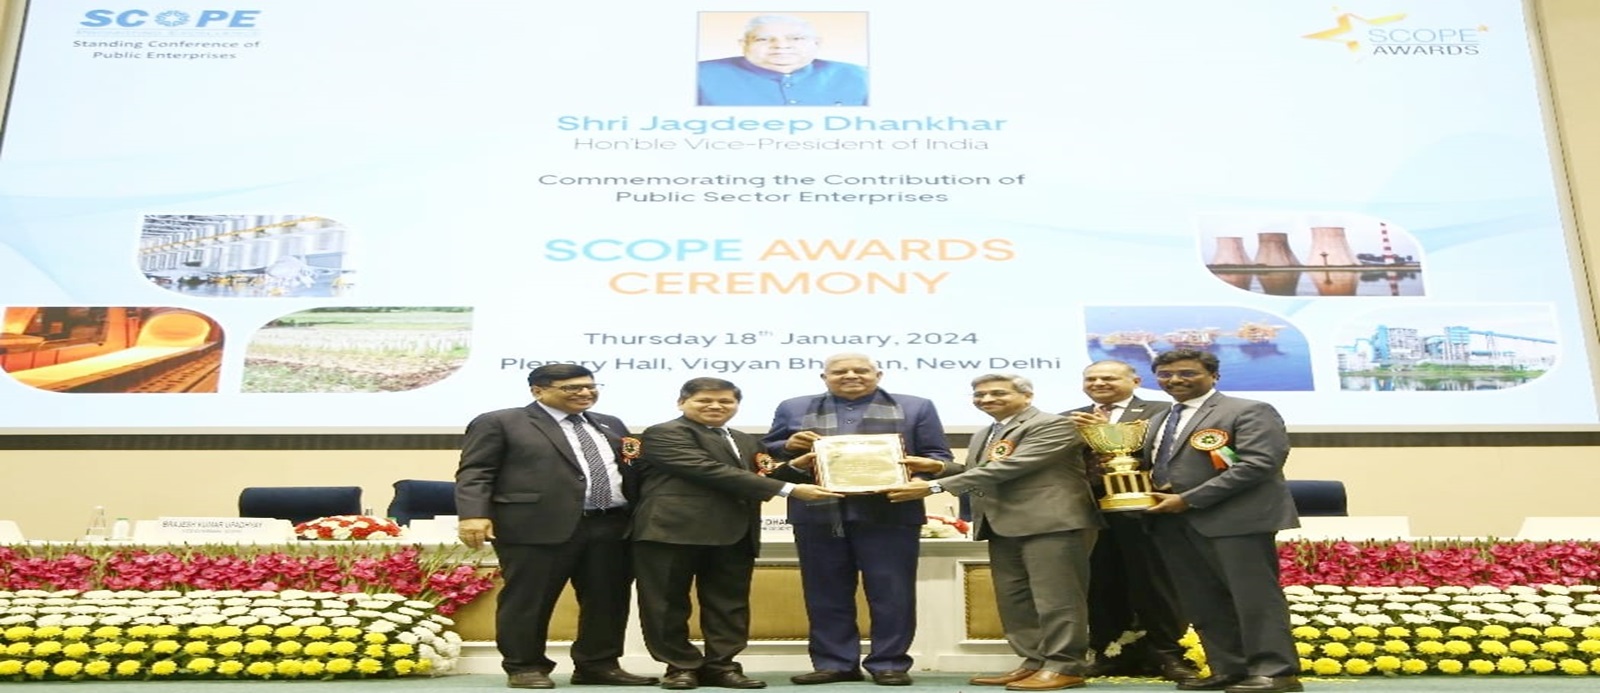 The Hon'ble Vice President of India, Sh. Jagdeep Dhankhar, presented the SCOPE Eminence Award to RailTel. The company won the award in Institutional Excellence (Miniratna I & II) Category for overall outstanding performance during the year 19-20. Moment of Pride for the RailTel family.